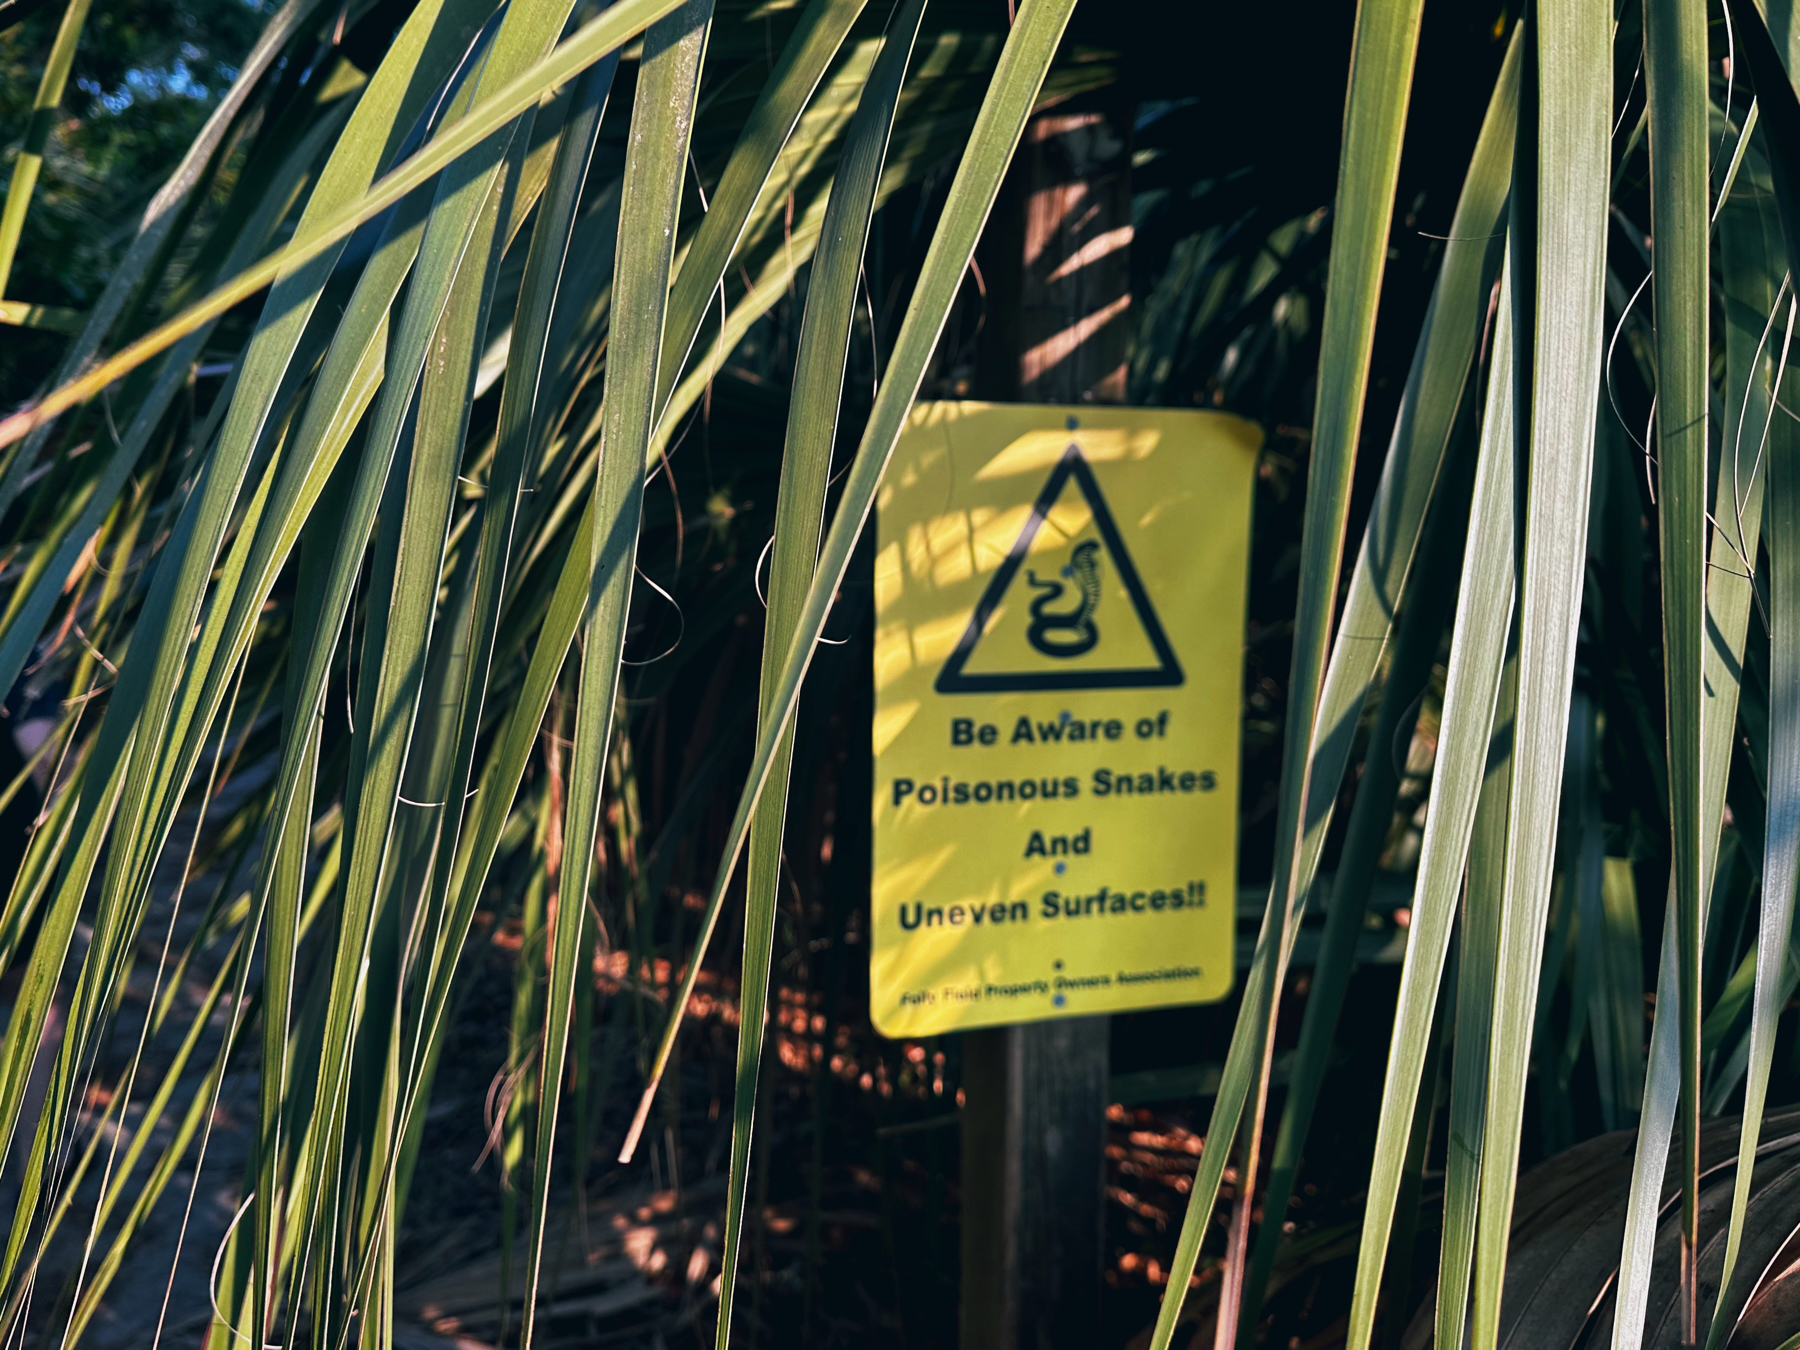 A yellow sign reading “Be Aware of Poisonous Snakes and Uneven Surfaces” is seen behind the fronds of a palm tree. The sign features an illustration of a cobra (?!) inside of a triangle.